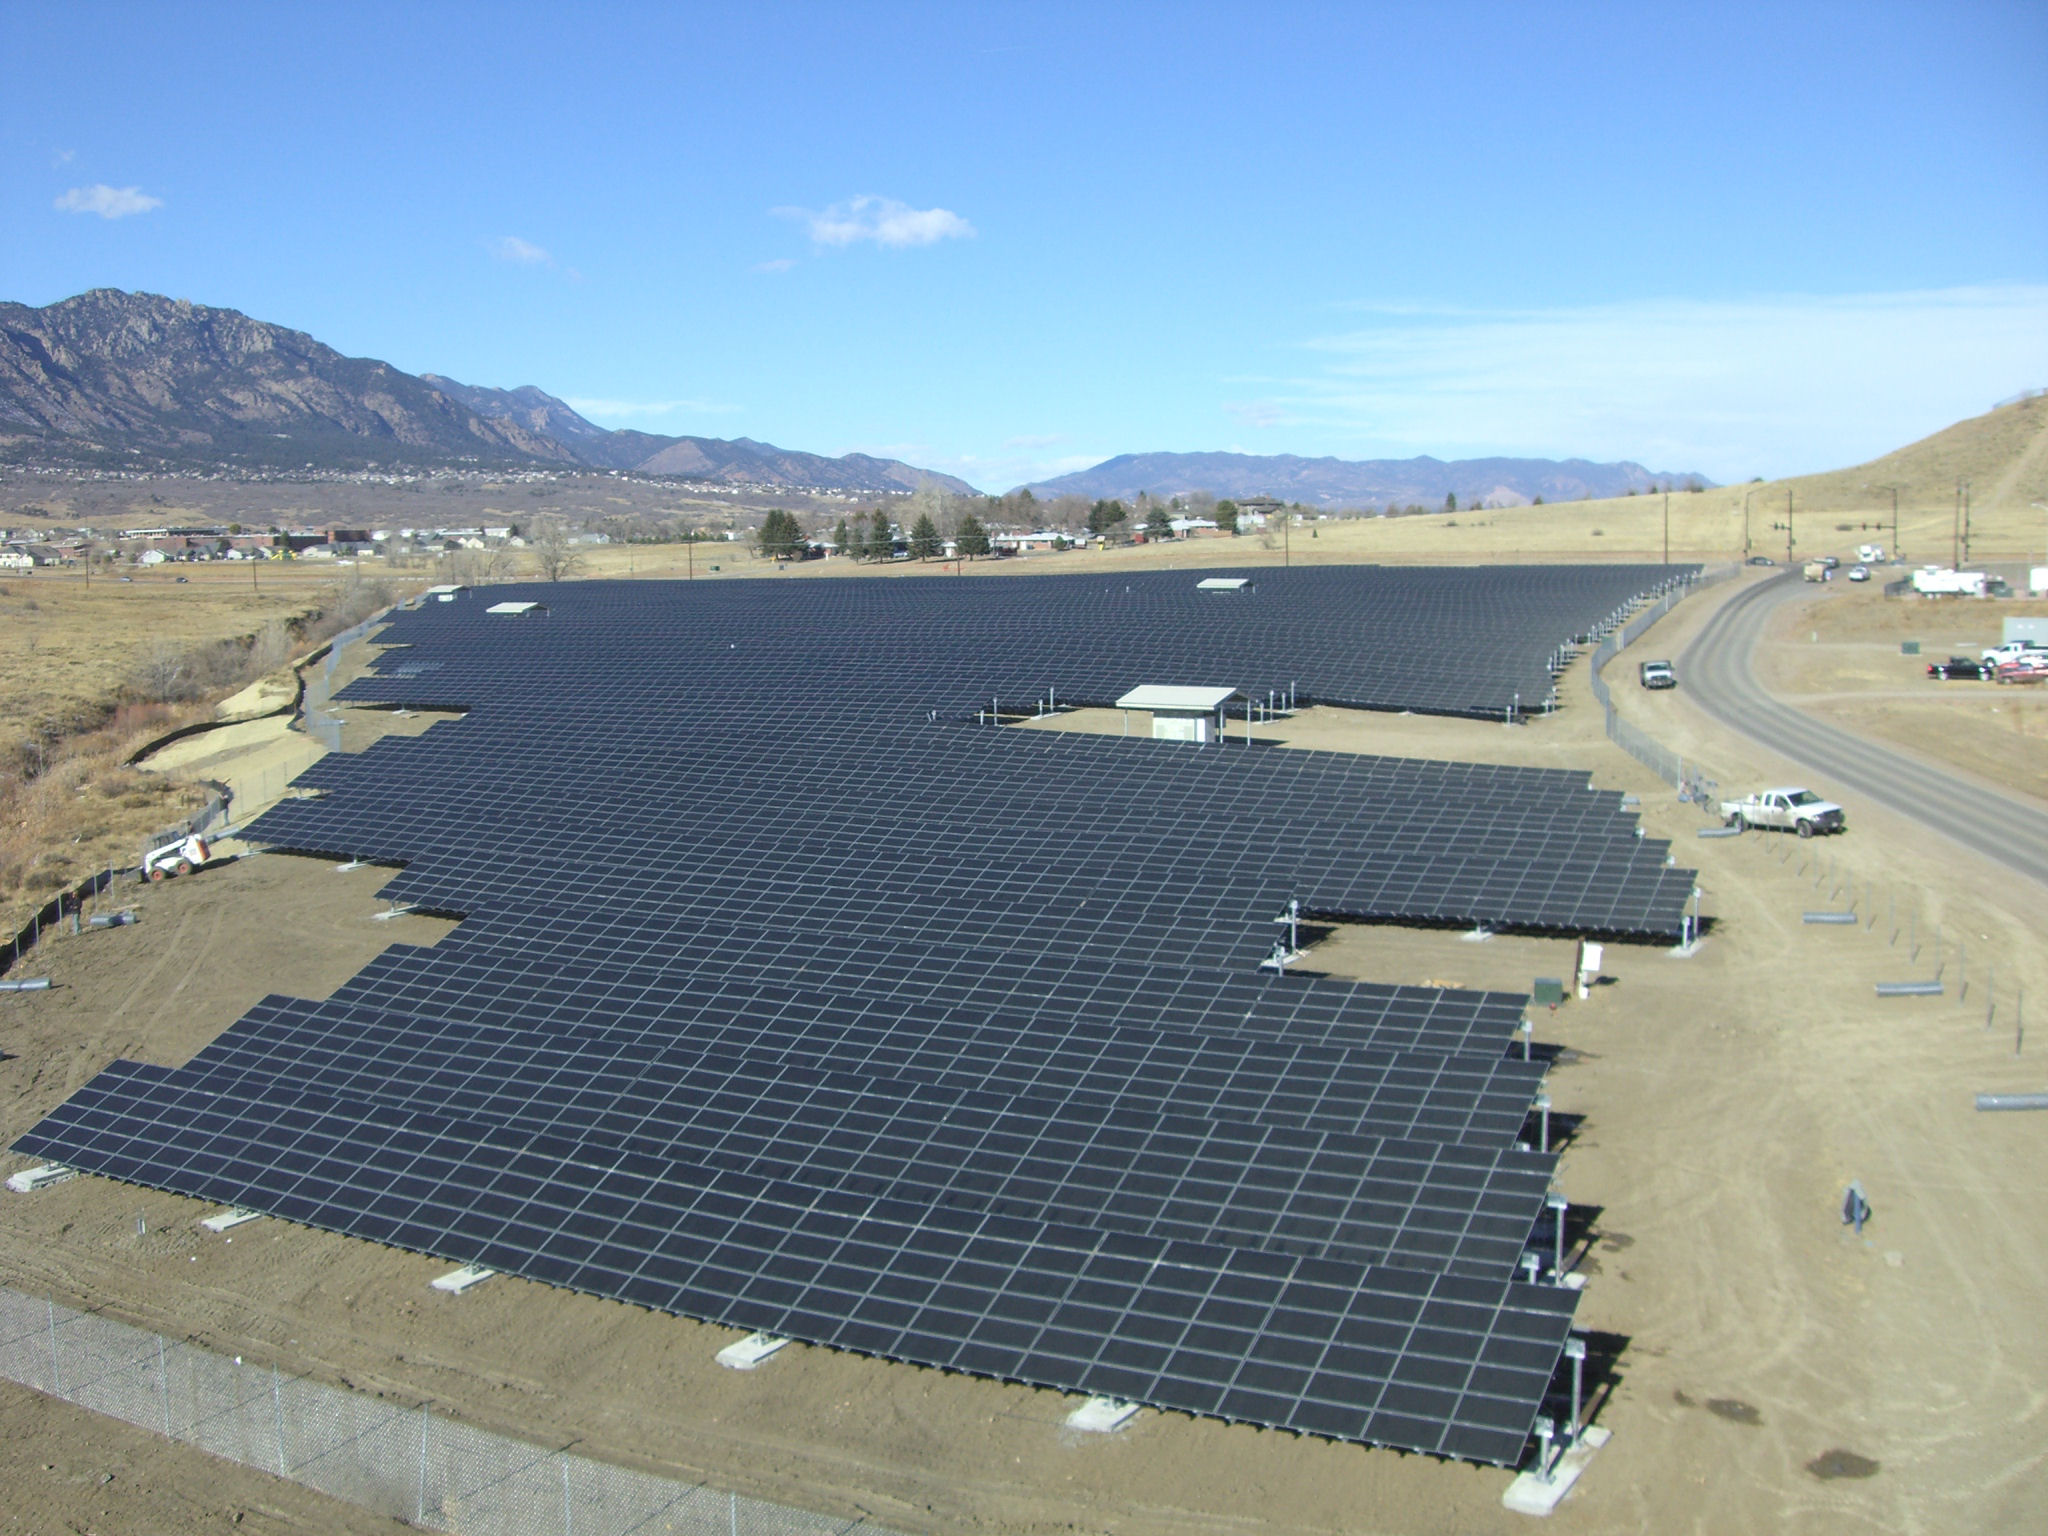 2-megawatt solar photovoltaic array located on a decommissioned landfill at Ft. Carson